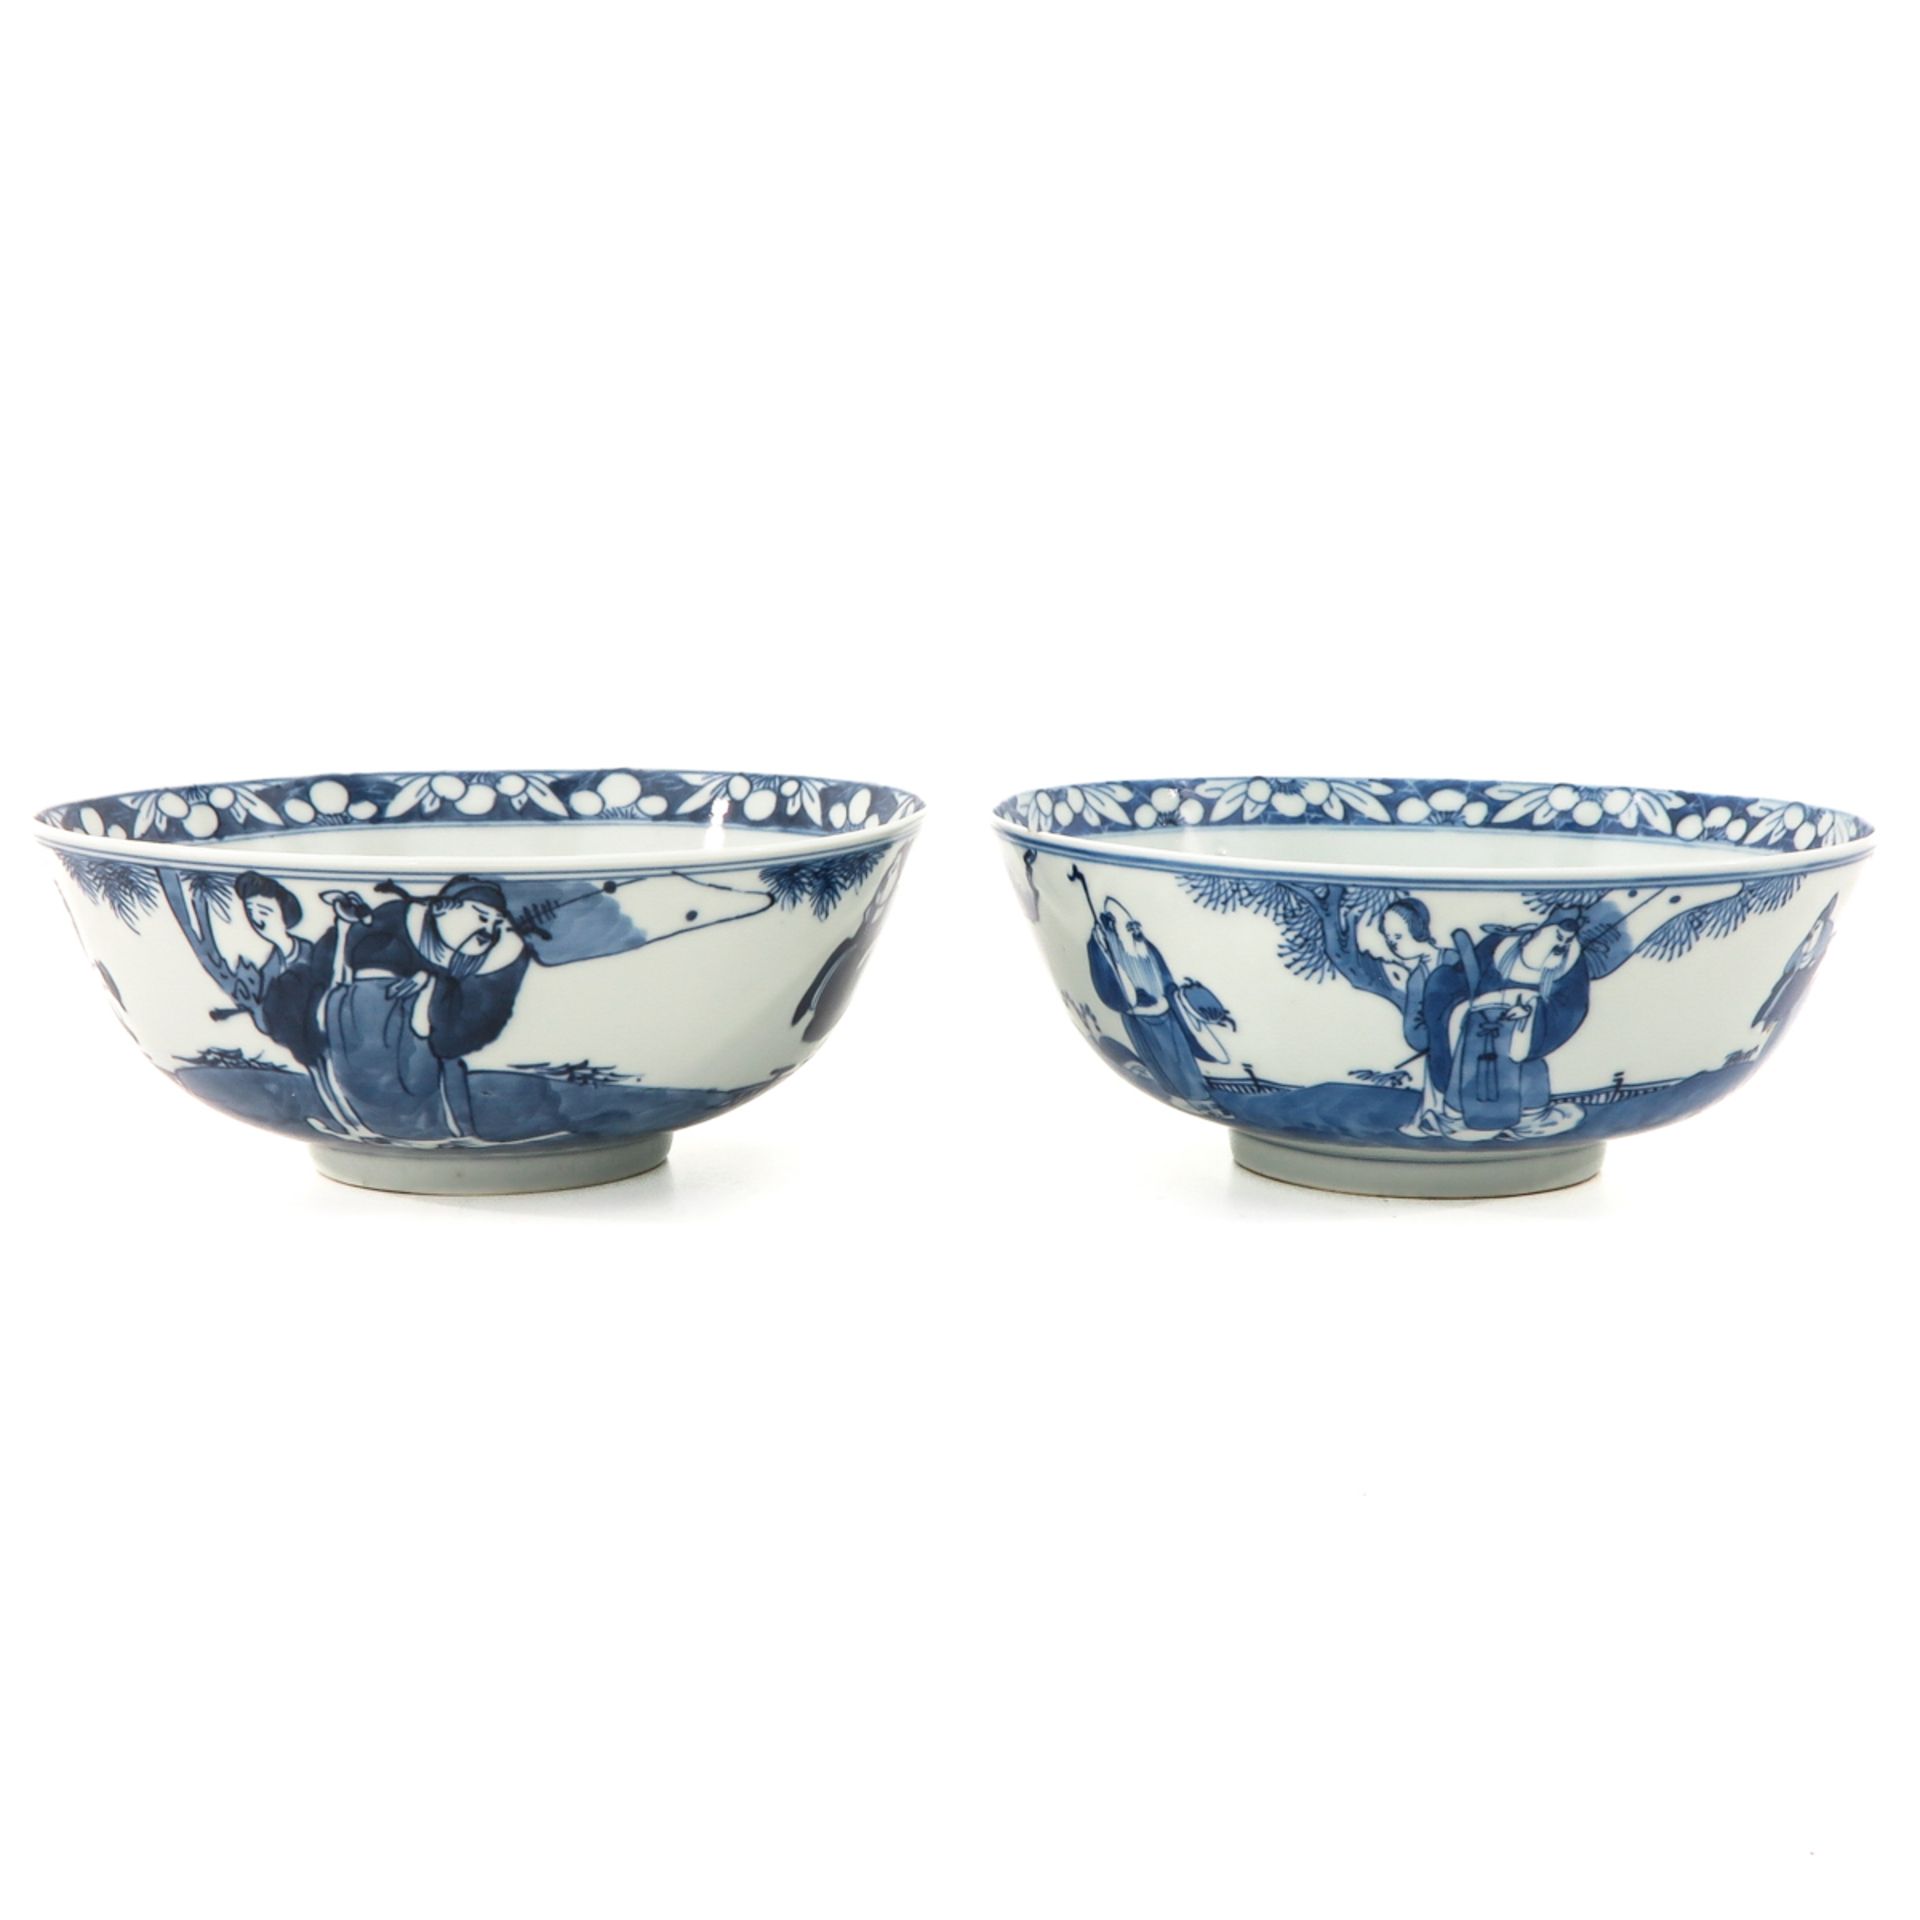 A Lot of 2 Blue and White Bowls